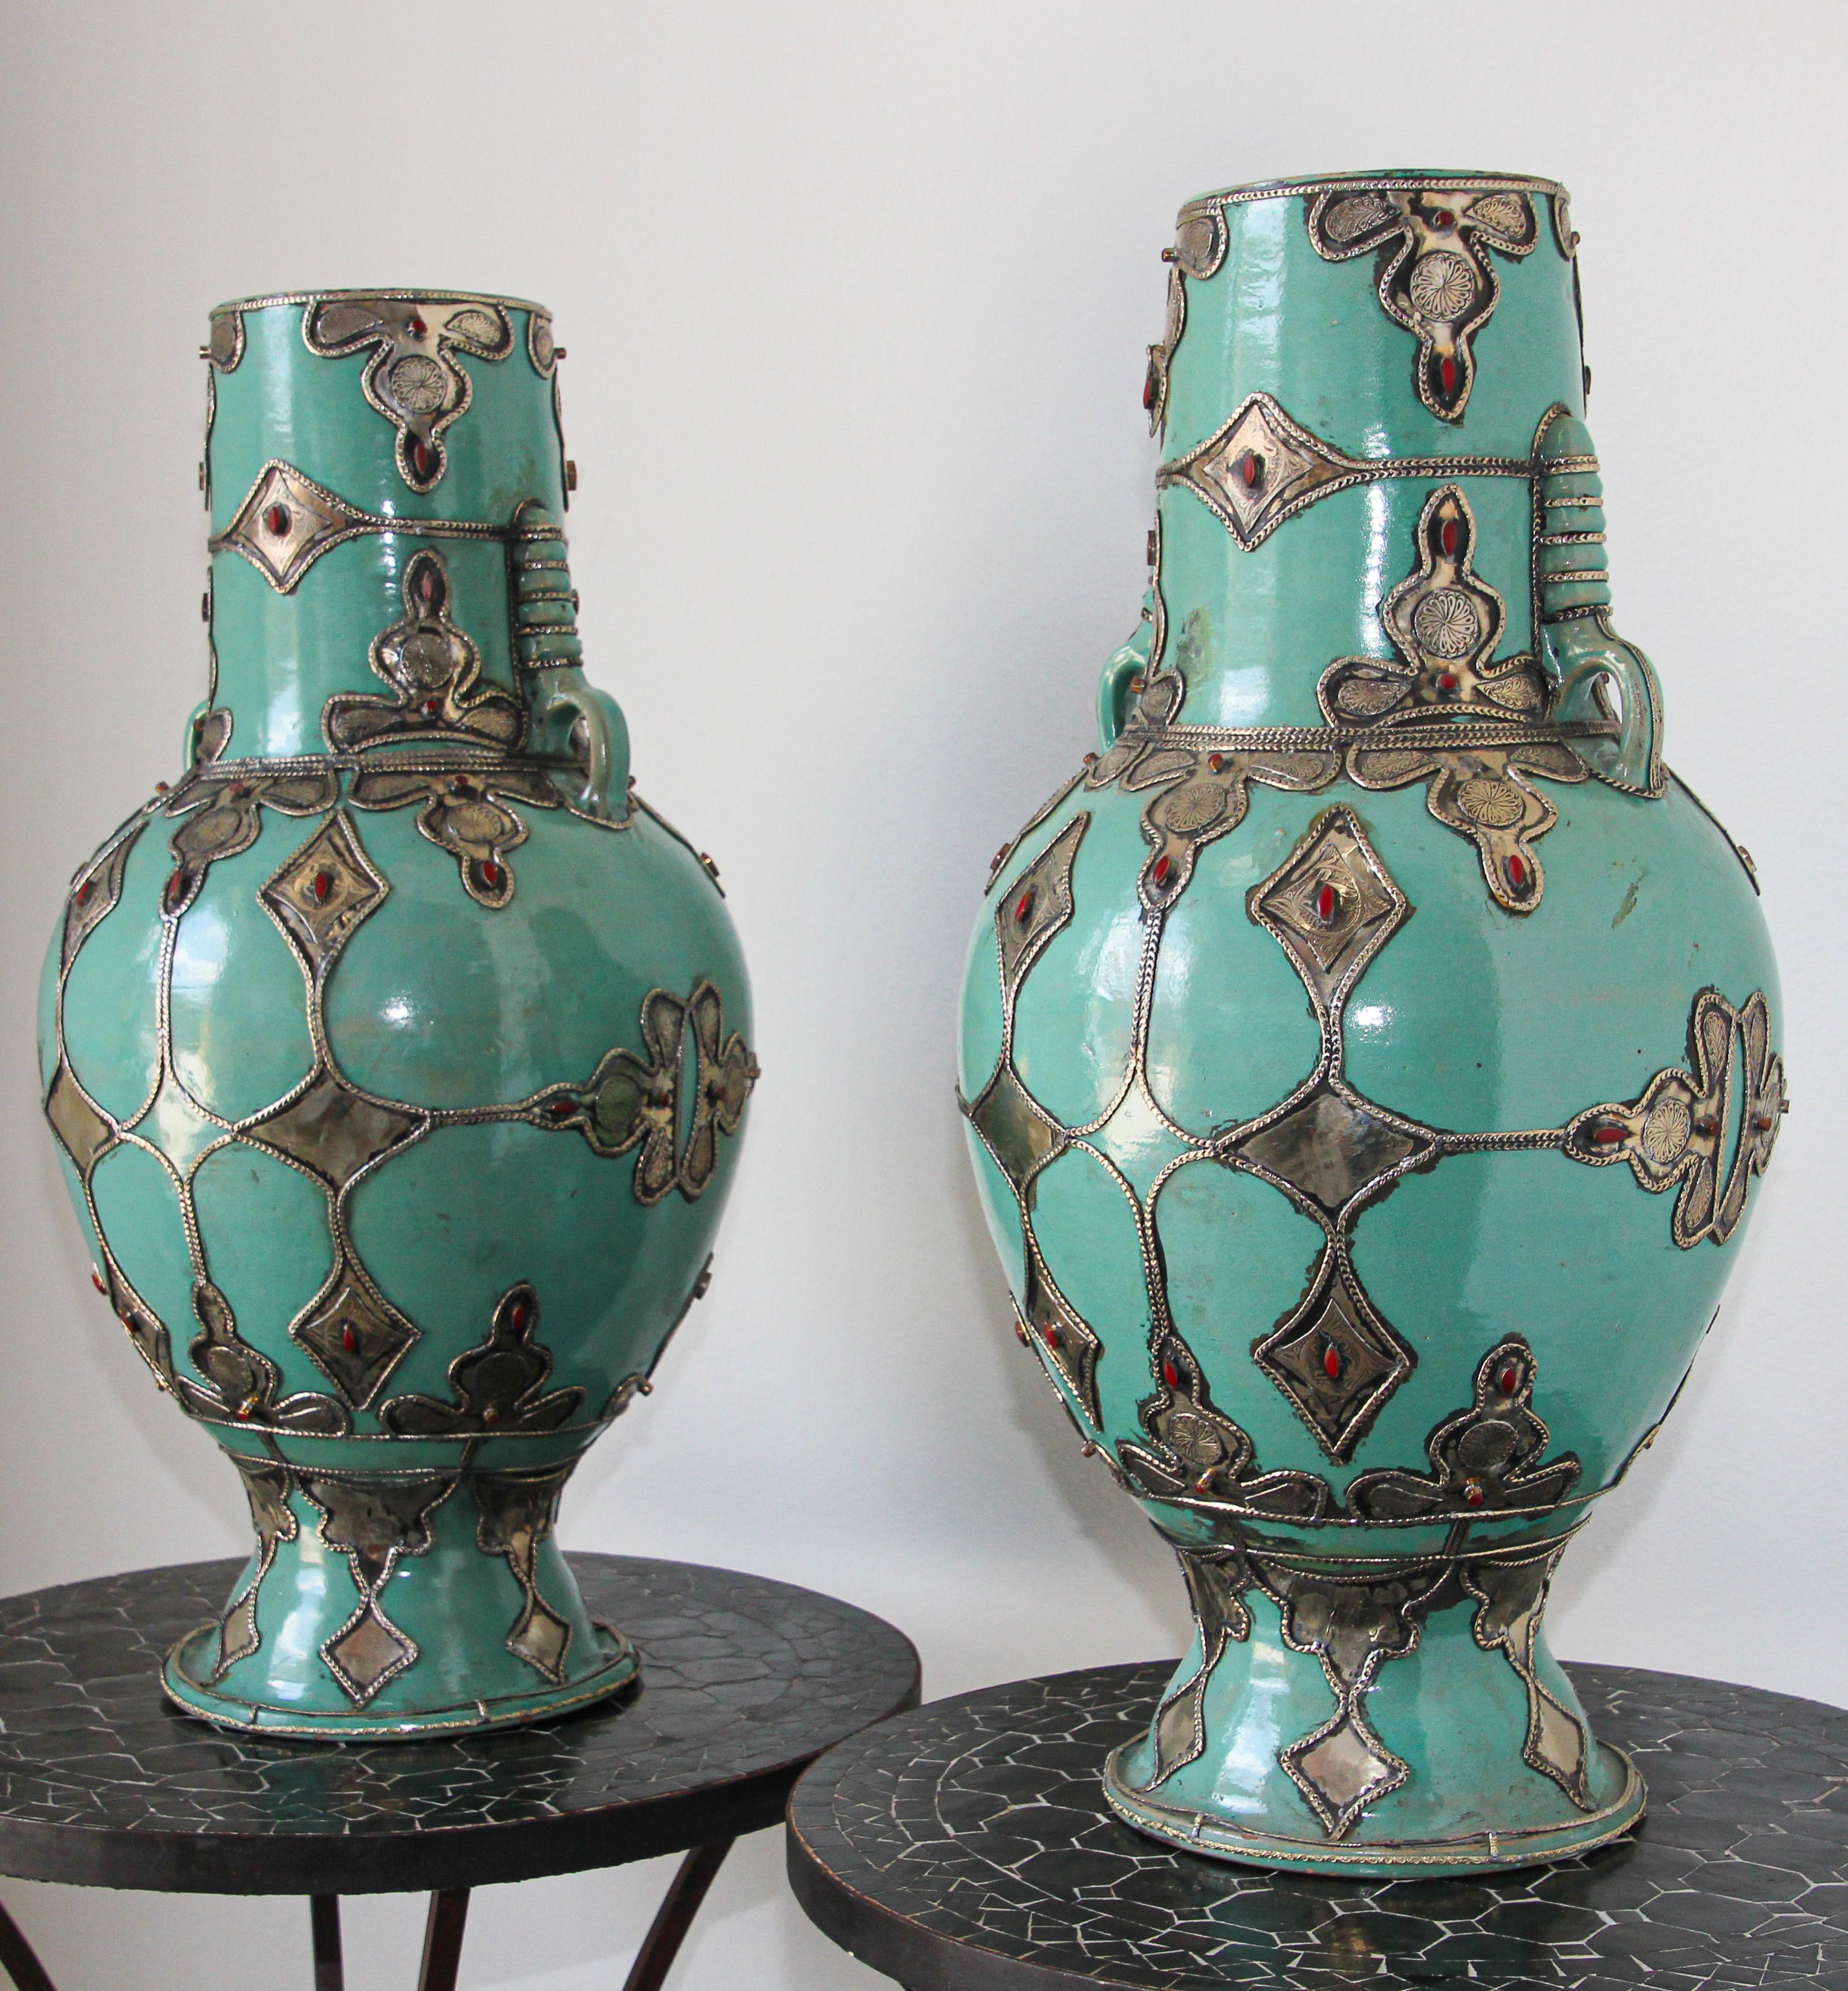 Hand-Carved Handcrafted Large Moorish Ceramic Vases with Handles